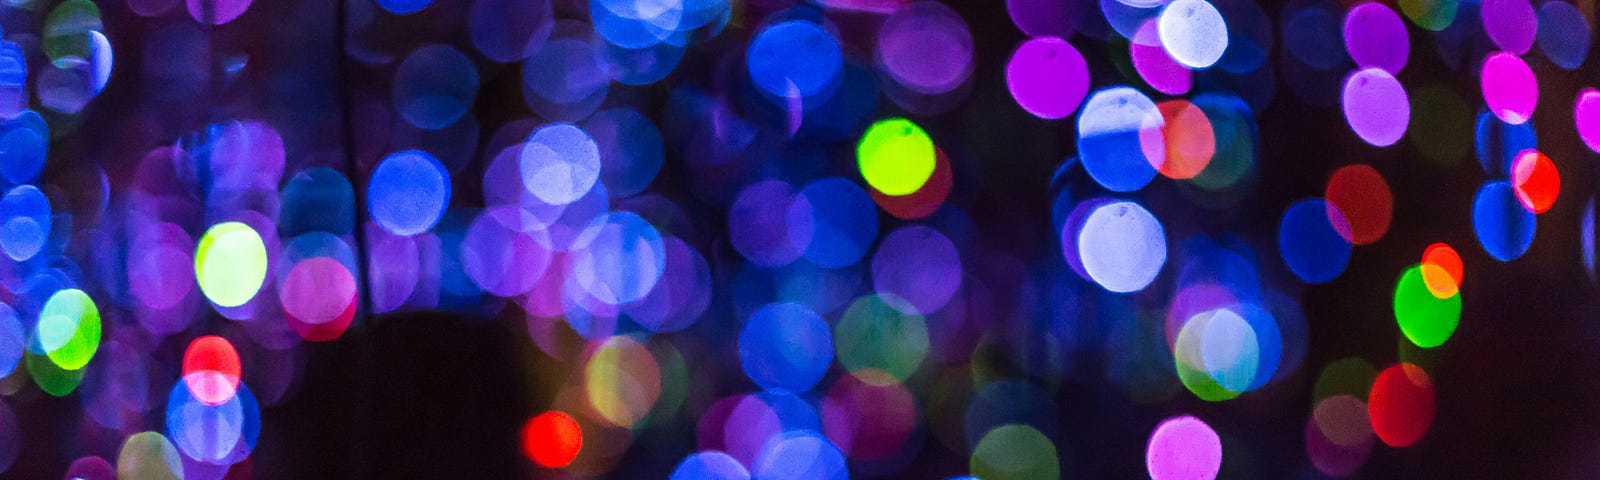 colorful lights int he background